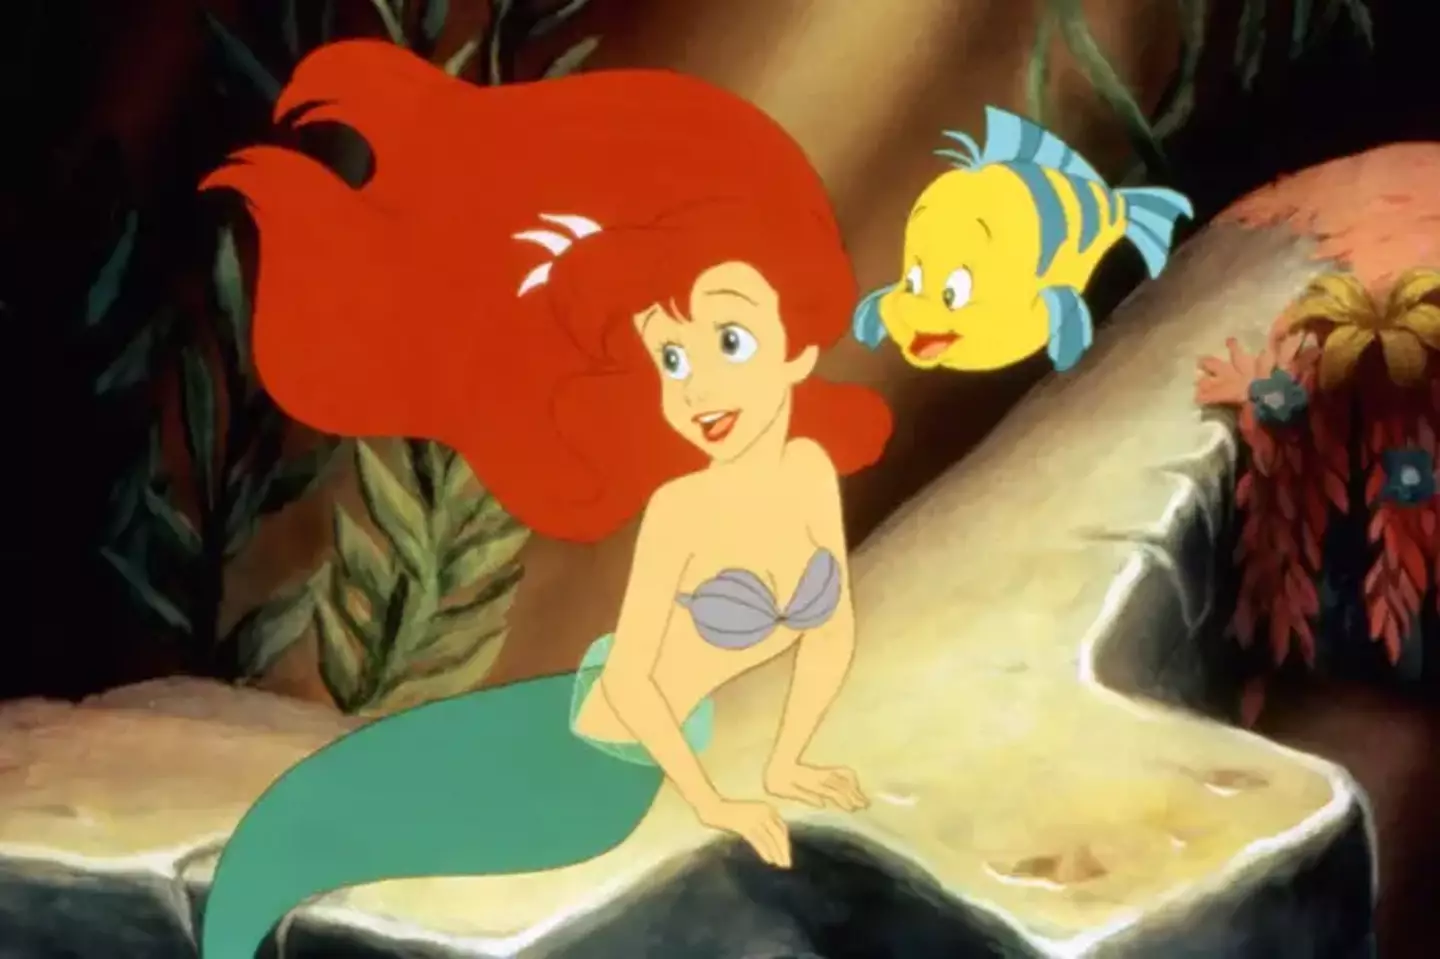 Disney fans are unhappy with how Flounder has been reimagined.